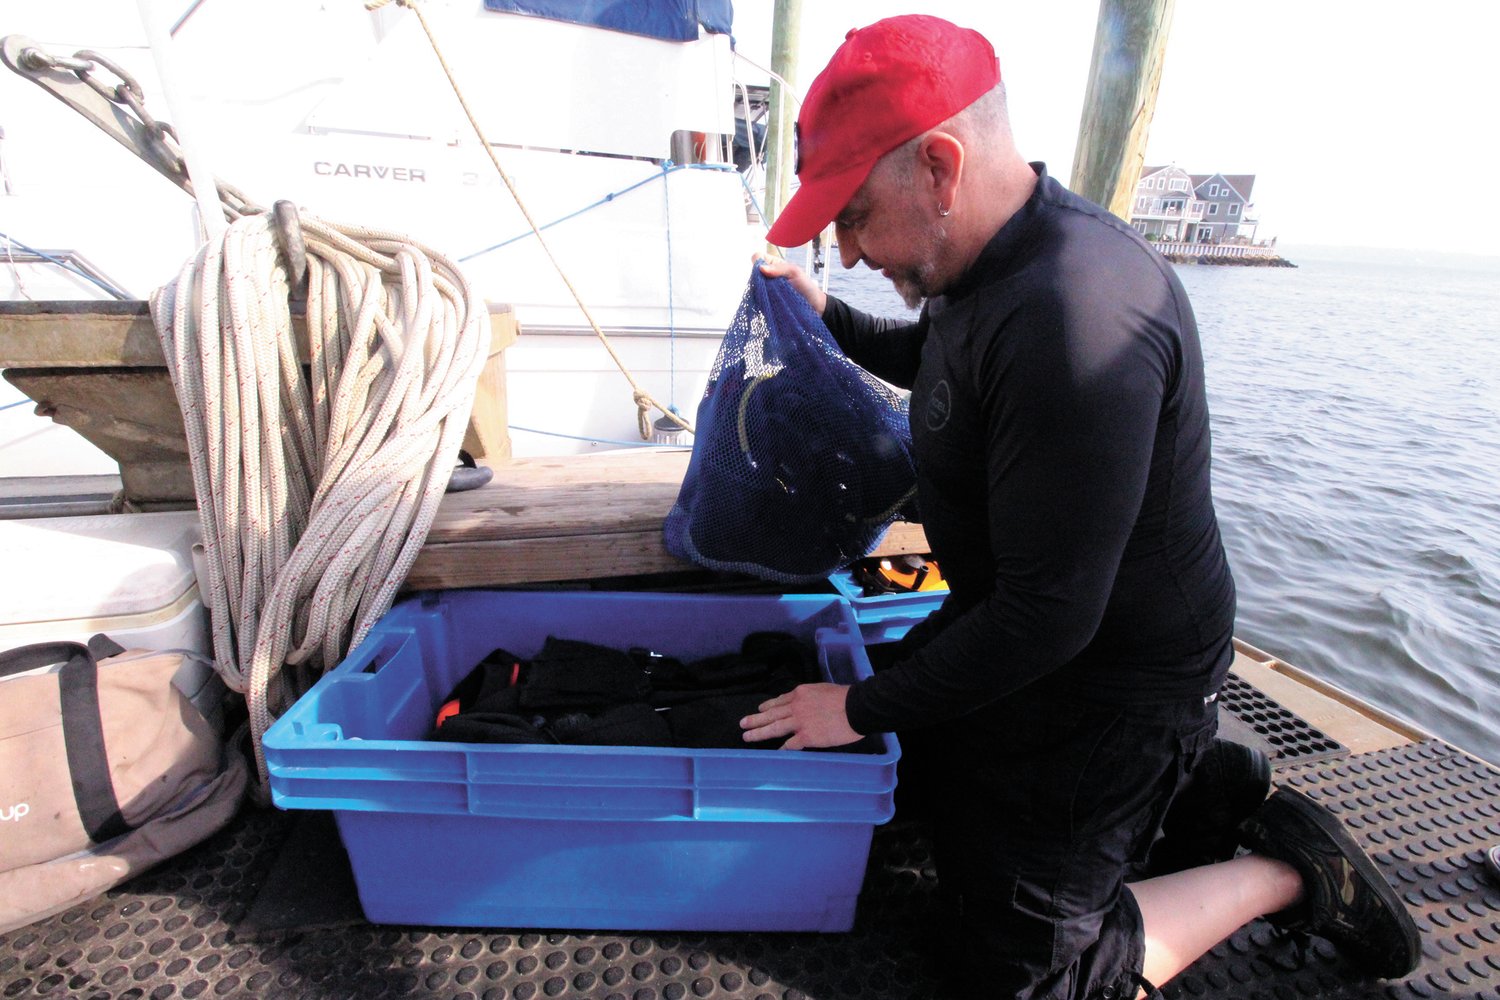 CHECKING HIS GEAR:  Peter Nulton readies for a day of diving in search for the Gaspee. Also diving Sunday were Joe Duquette and Gage Hull. Greg DeAscentis operated the vessel which he owns. (Cranston Herald photos)